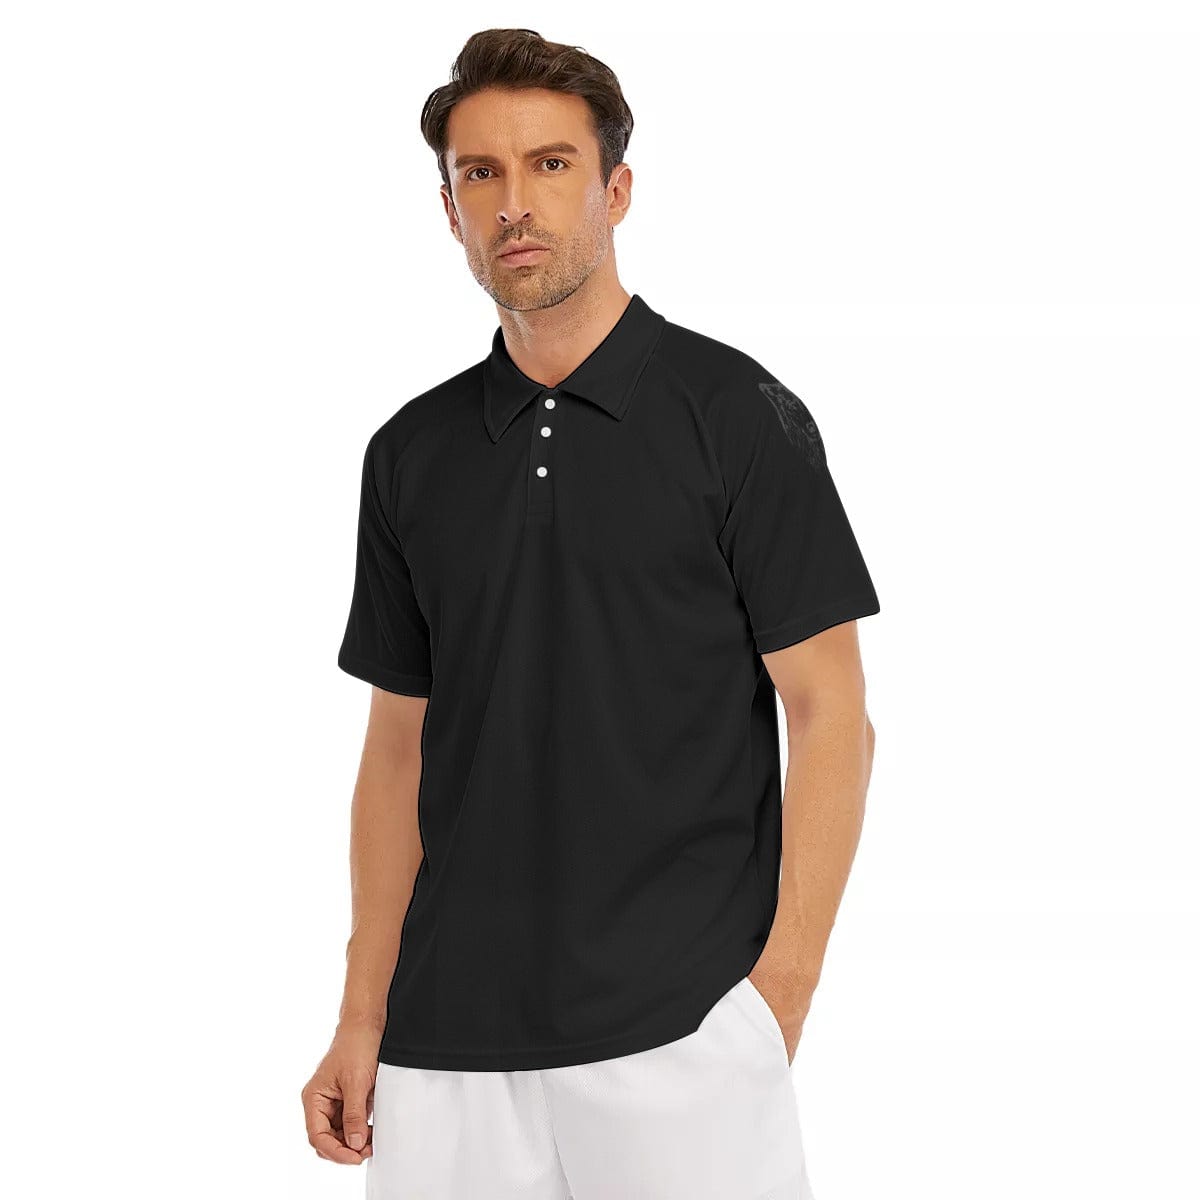 Ghostly Wolf Men's Short Sleeve Polo Shirt